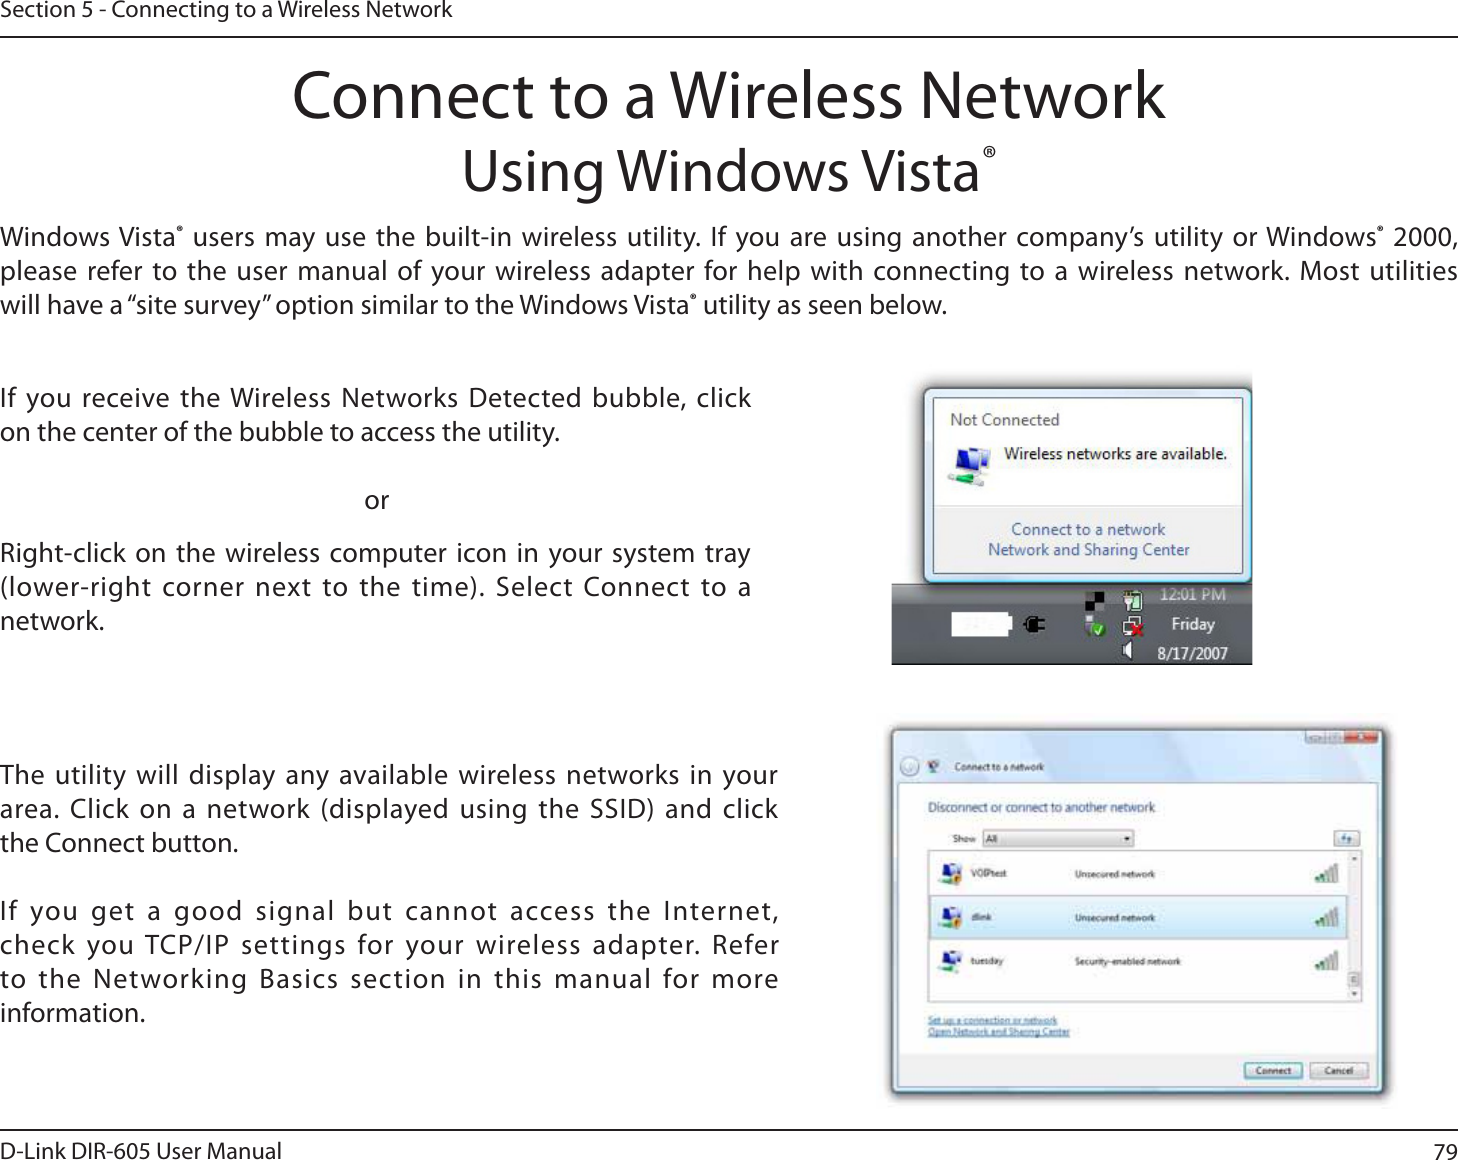 79D-Link DIR-605 User ManualSection 5 - Connecting to a Wireless NetworkConnect to a Wireless NetworkUsing Windows Vista®Windows Vista® users may use the built-in wireless utility. If you are using another company’s utility or Windows® 2000, please refer to the user manual of your wireless adapter for help with connecting to a wireless network. Most utilities will have a “site survey” option similar to the Windows Vista® utility as seen below.Right-click on the wireless computer icon in your system tray (lower-right corner next to the time). Select Connect to a network.If you receive the Wireless Networks Detected bubble, click on the center of the bubble to access the utility.     orThe utility will display any available wireless networks in your area. Click on a network (displayed using the SSID) and click the Connect button.If you get a good signal but cannot access the Internet, check you TCP/IP settings for your wireless adapter. Refer to the Networking Basics section in this manual for more information.